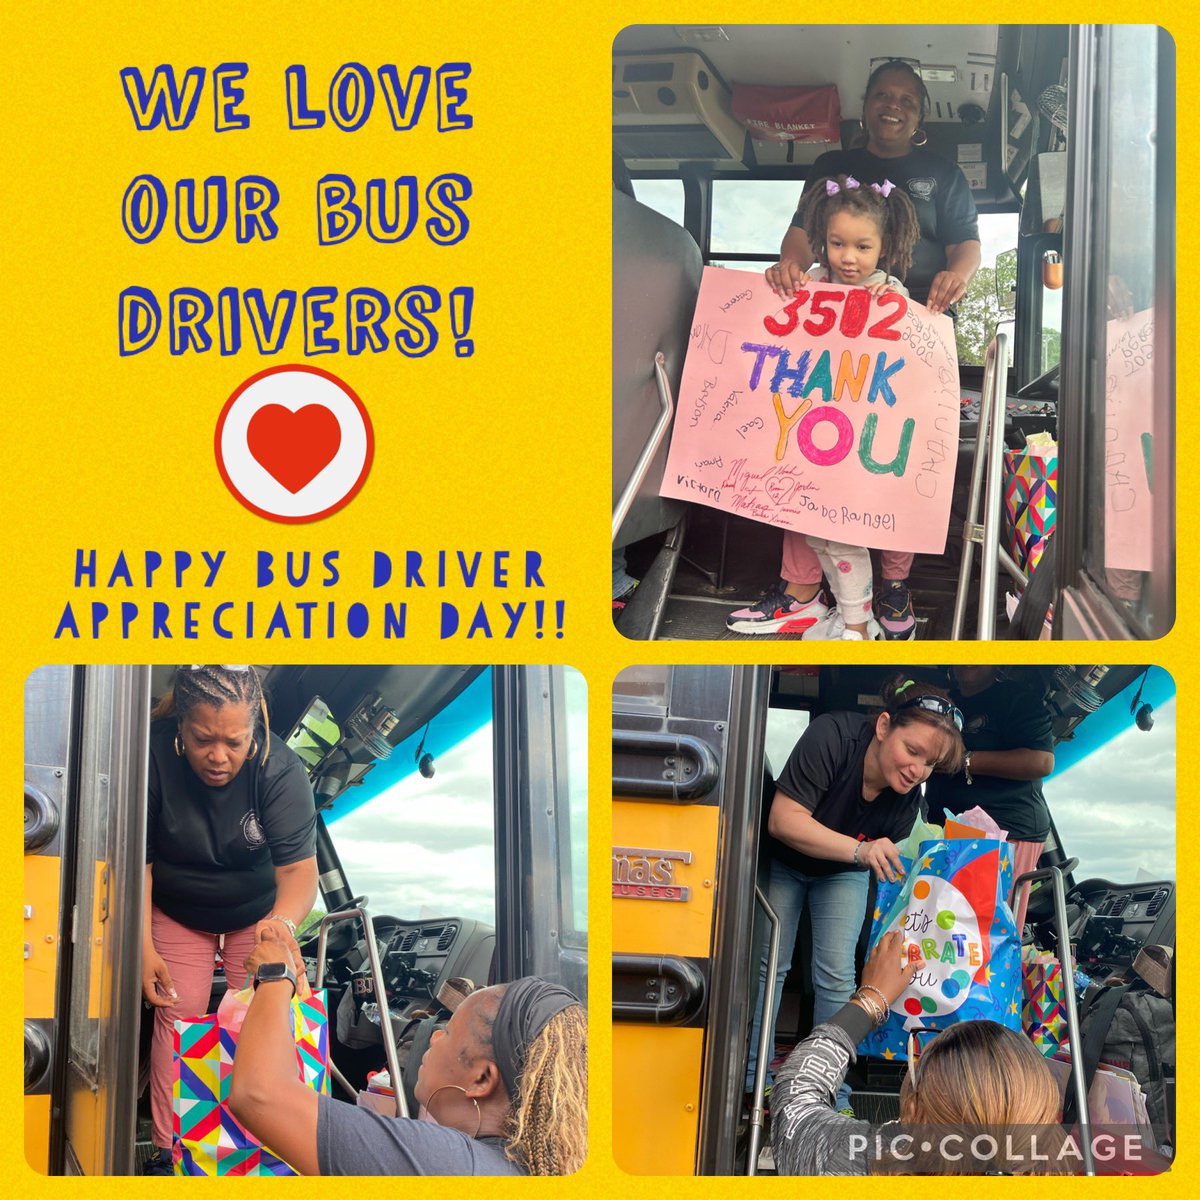 A heartfelt THANK YOU to the wonderful people that make sure our students arrive to school and back home safely each day! You are loved! 🫶🏼 #myaldine #mialdine #thankabusdriver @StovallPK_AISD @JoshuaGobert @przluis71 @MrAmes_ @AldineISD